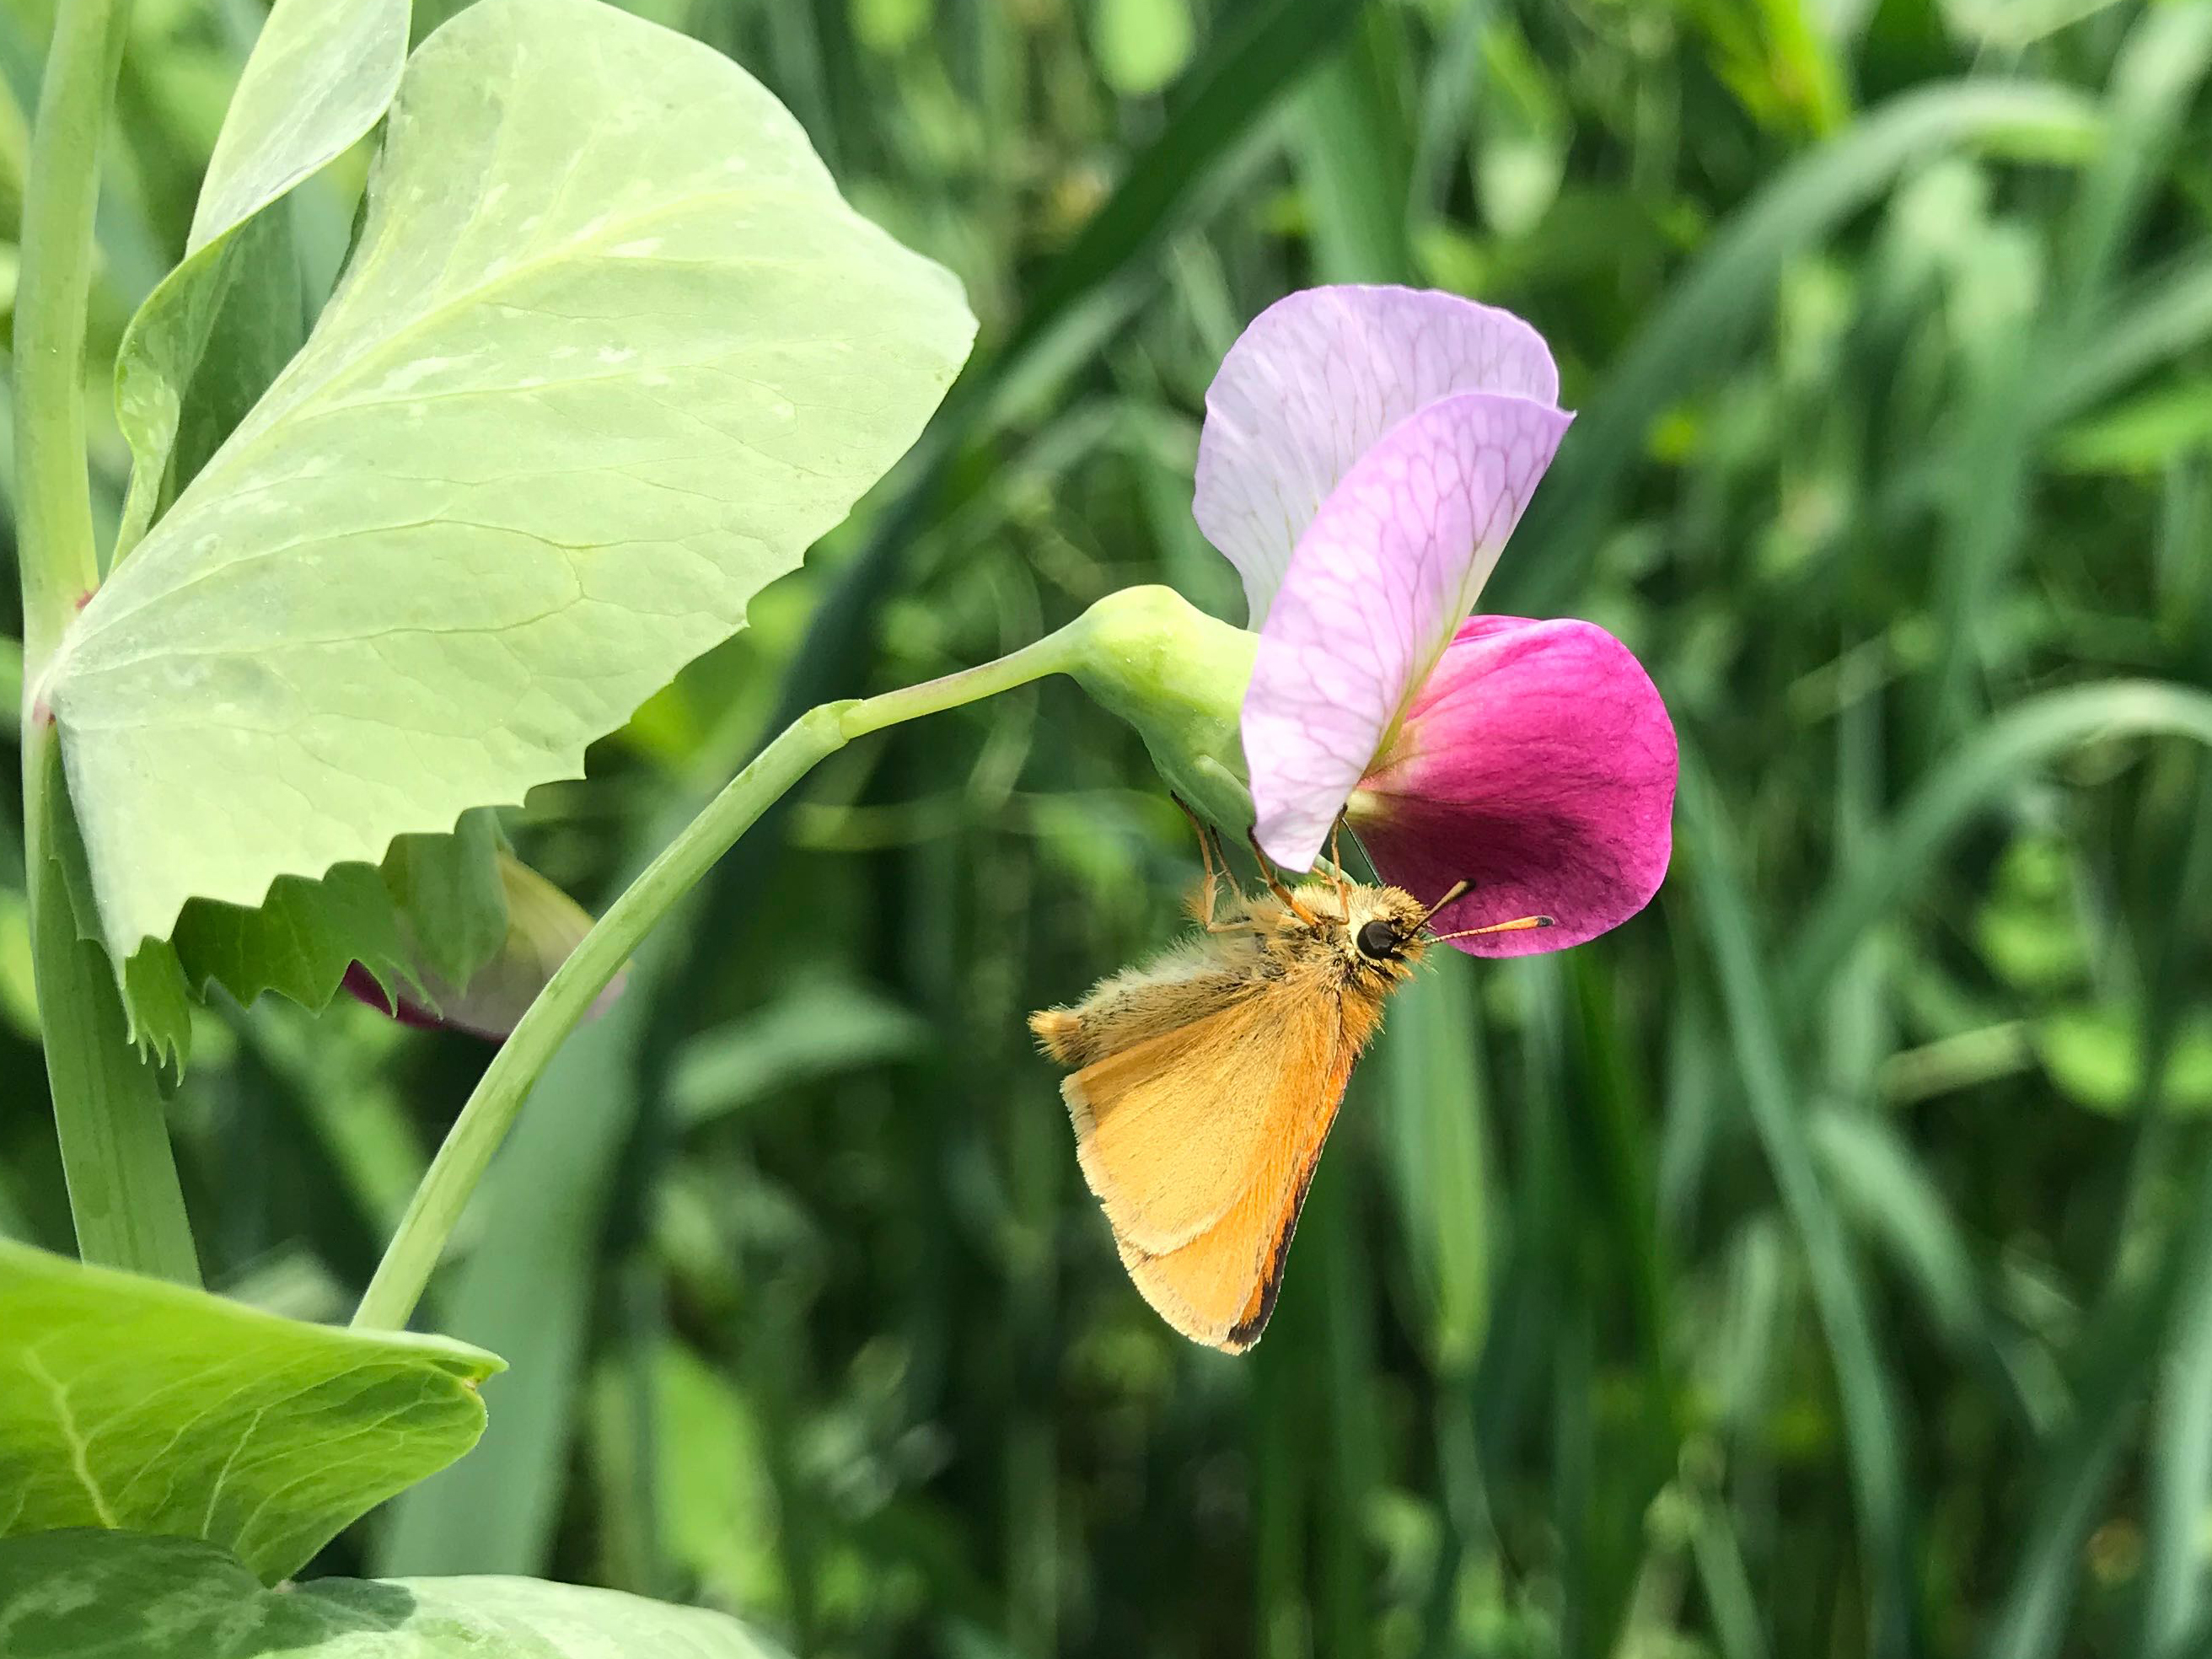 A yellow-orange butterfly hangs upside-down from a bright pink flower. Behind the butterfly is a lot of deep-green vegetation.